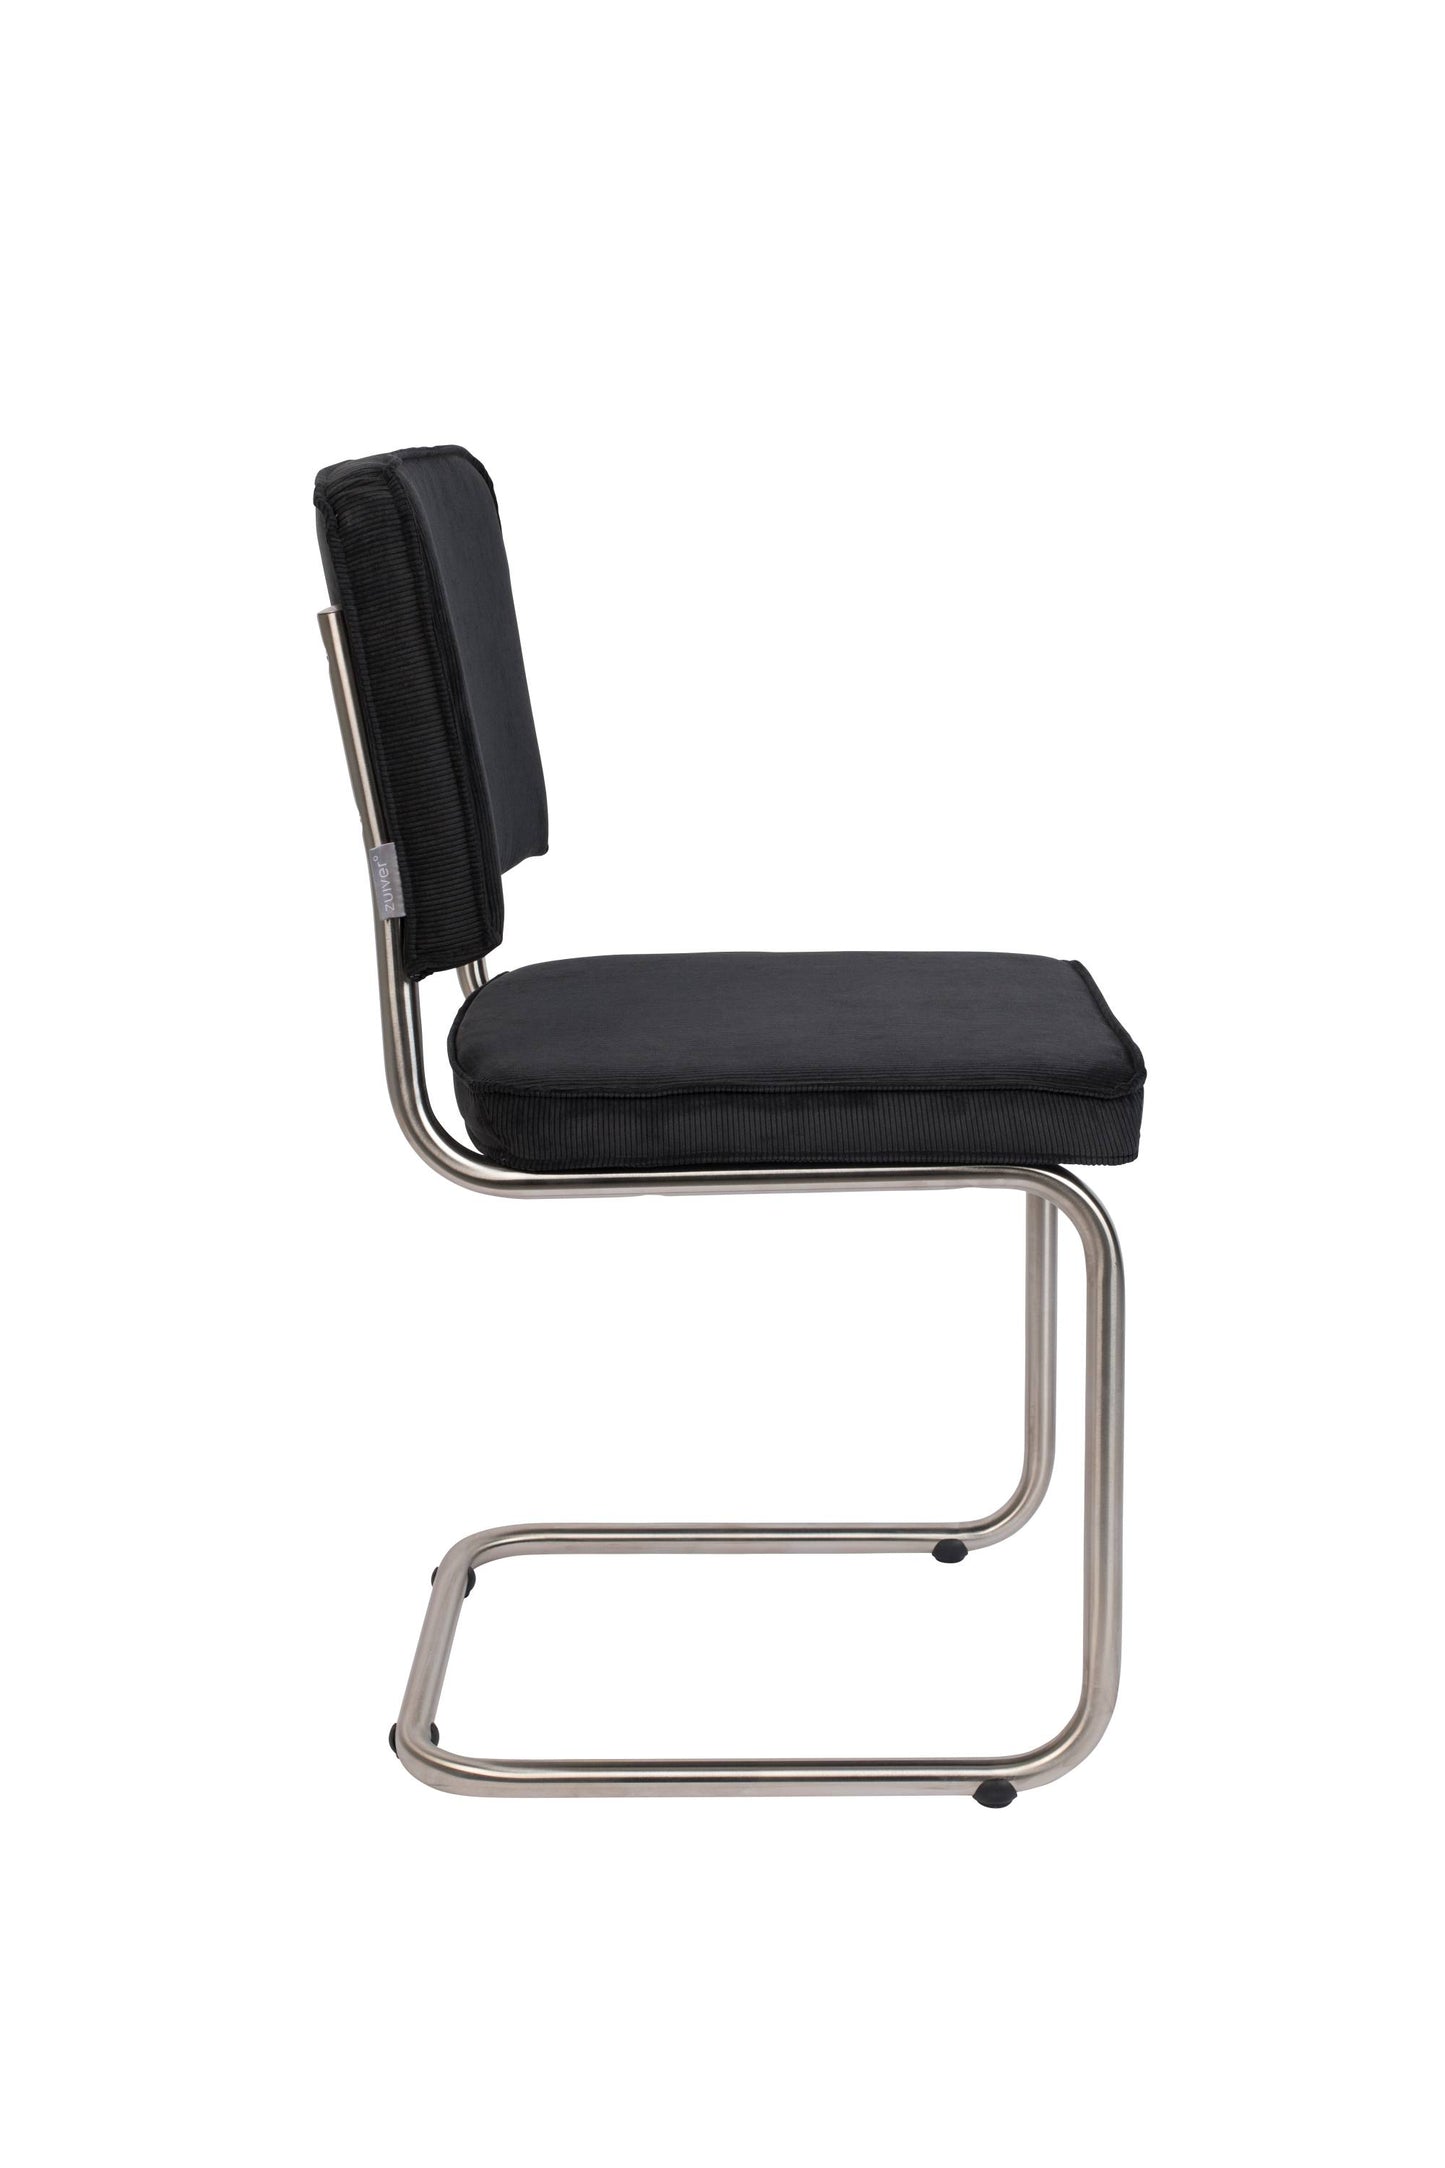 Zuiver | CHAIR RIDGE BRUSHED RIB BLACK 7A Default Title